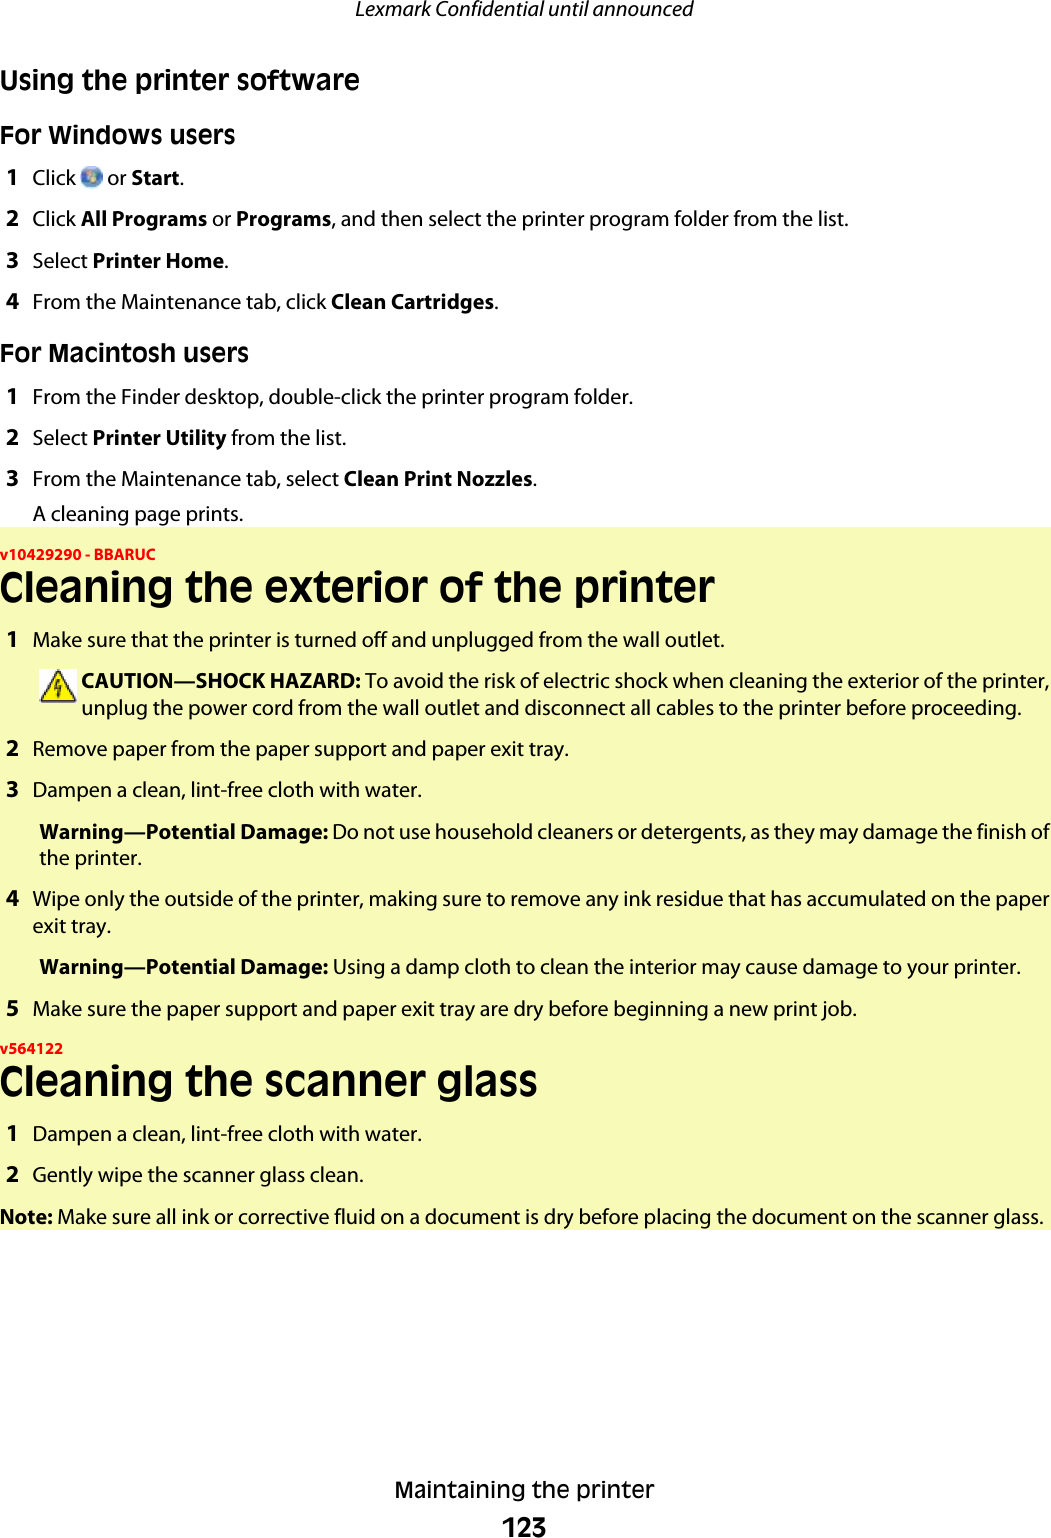 Using the printer softwareFor Windows users1Click   or Start.2Click All Programs or Programs, and then select the printer program folder from the list.3Select Printer Home.4From the Maintenance tab, click Clean Cartridges.For Macintosh users1From the Finder desktop, double-click the printer program folder.2Select Printer Utility from the list.3From the Maintenance tab, select Clean Print Nozzles.A cleaning page prints.v10429290 - BBARUCCleaning the exterior of the printer1Make sure that the printer is turned off and unplugged from the wall outlet.CAUTION—SHOCK HAZARD: To avoid the risk of electric shock when cleaning the exterior of the printer,unplug the power cord from the wall outlet and disconnect all cables to the printer before proceeding.2Remove paper from the paper support and paper exit tray.3Dampen a clean, lint-free cloth with water.Warning—Potential Damage: Do not use household cleaners or detergents, as they may damage the finish ofthe printer.4Wipe only the outside of the printer, making sure to remove any ink residue that has accumulated on the paperexit tray.Warning—Potential Damage: Using a damp cloth to clean the interior may cause damage to your printer.5Make sure the paper support and paper exit tray are dry before beginning a new print job.v564122Cleaning the scanner glass1Dampen a clean, lint-free cloth with water.2Gently wipe the scanner glass clean.Note: Make sure all ink or corrective fluid on a document is dry before placing the document on the scanner glass.Lexmark Confidential until announcedMaintaining the printer123